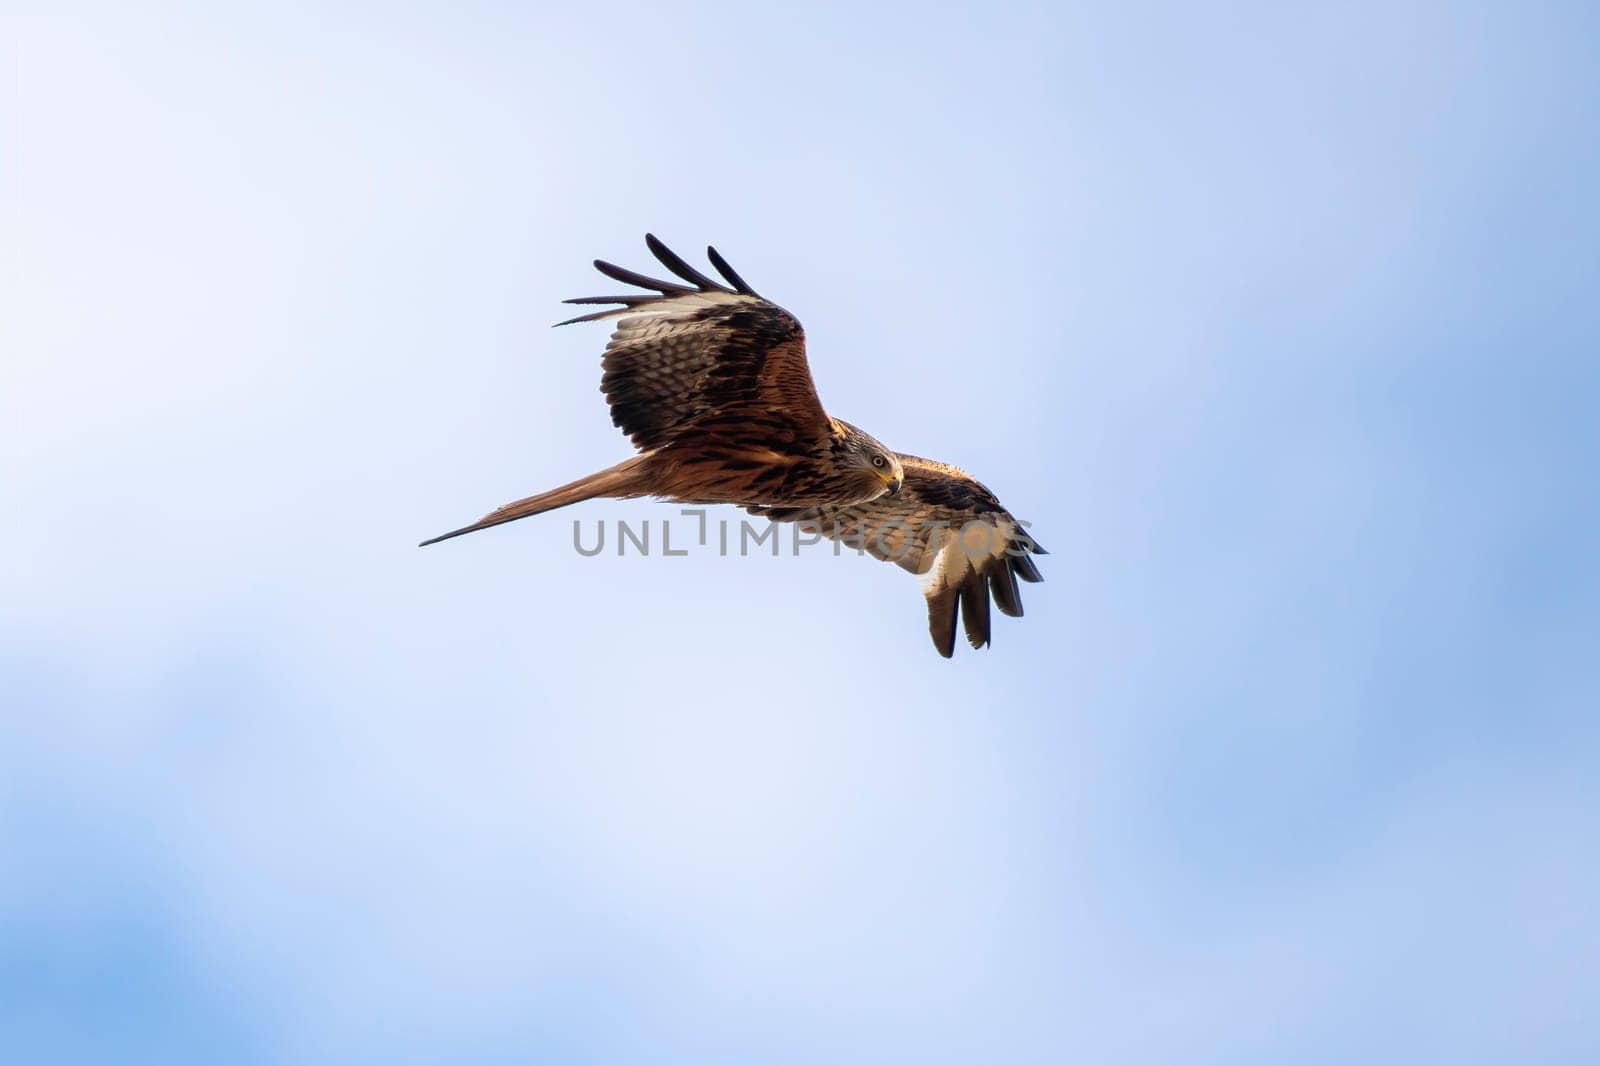 red kite flies in the blue sky looking for prey by mario_plechaty_photography